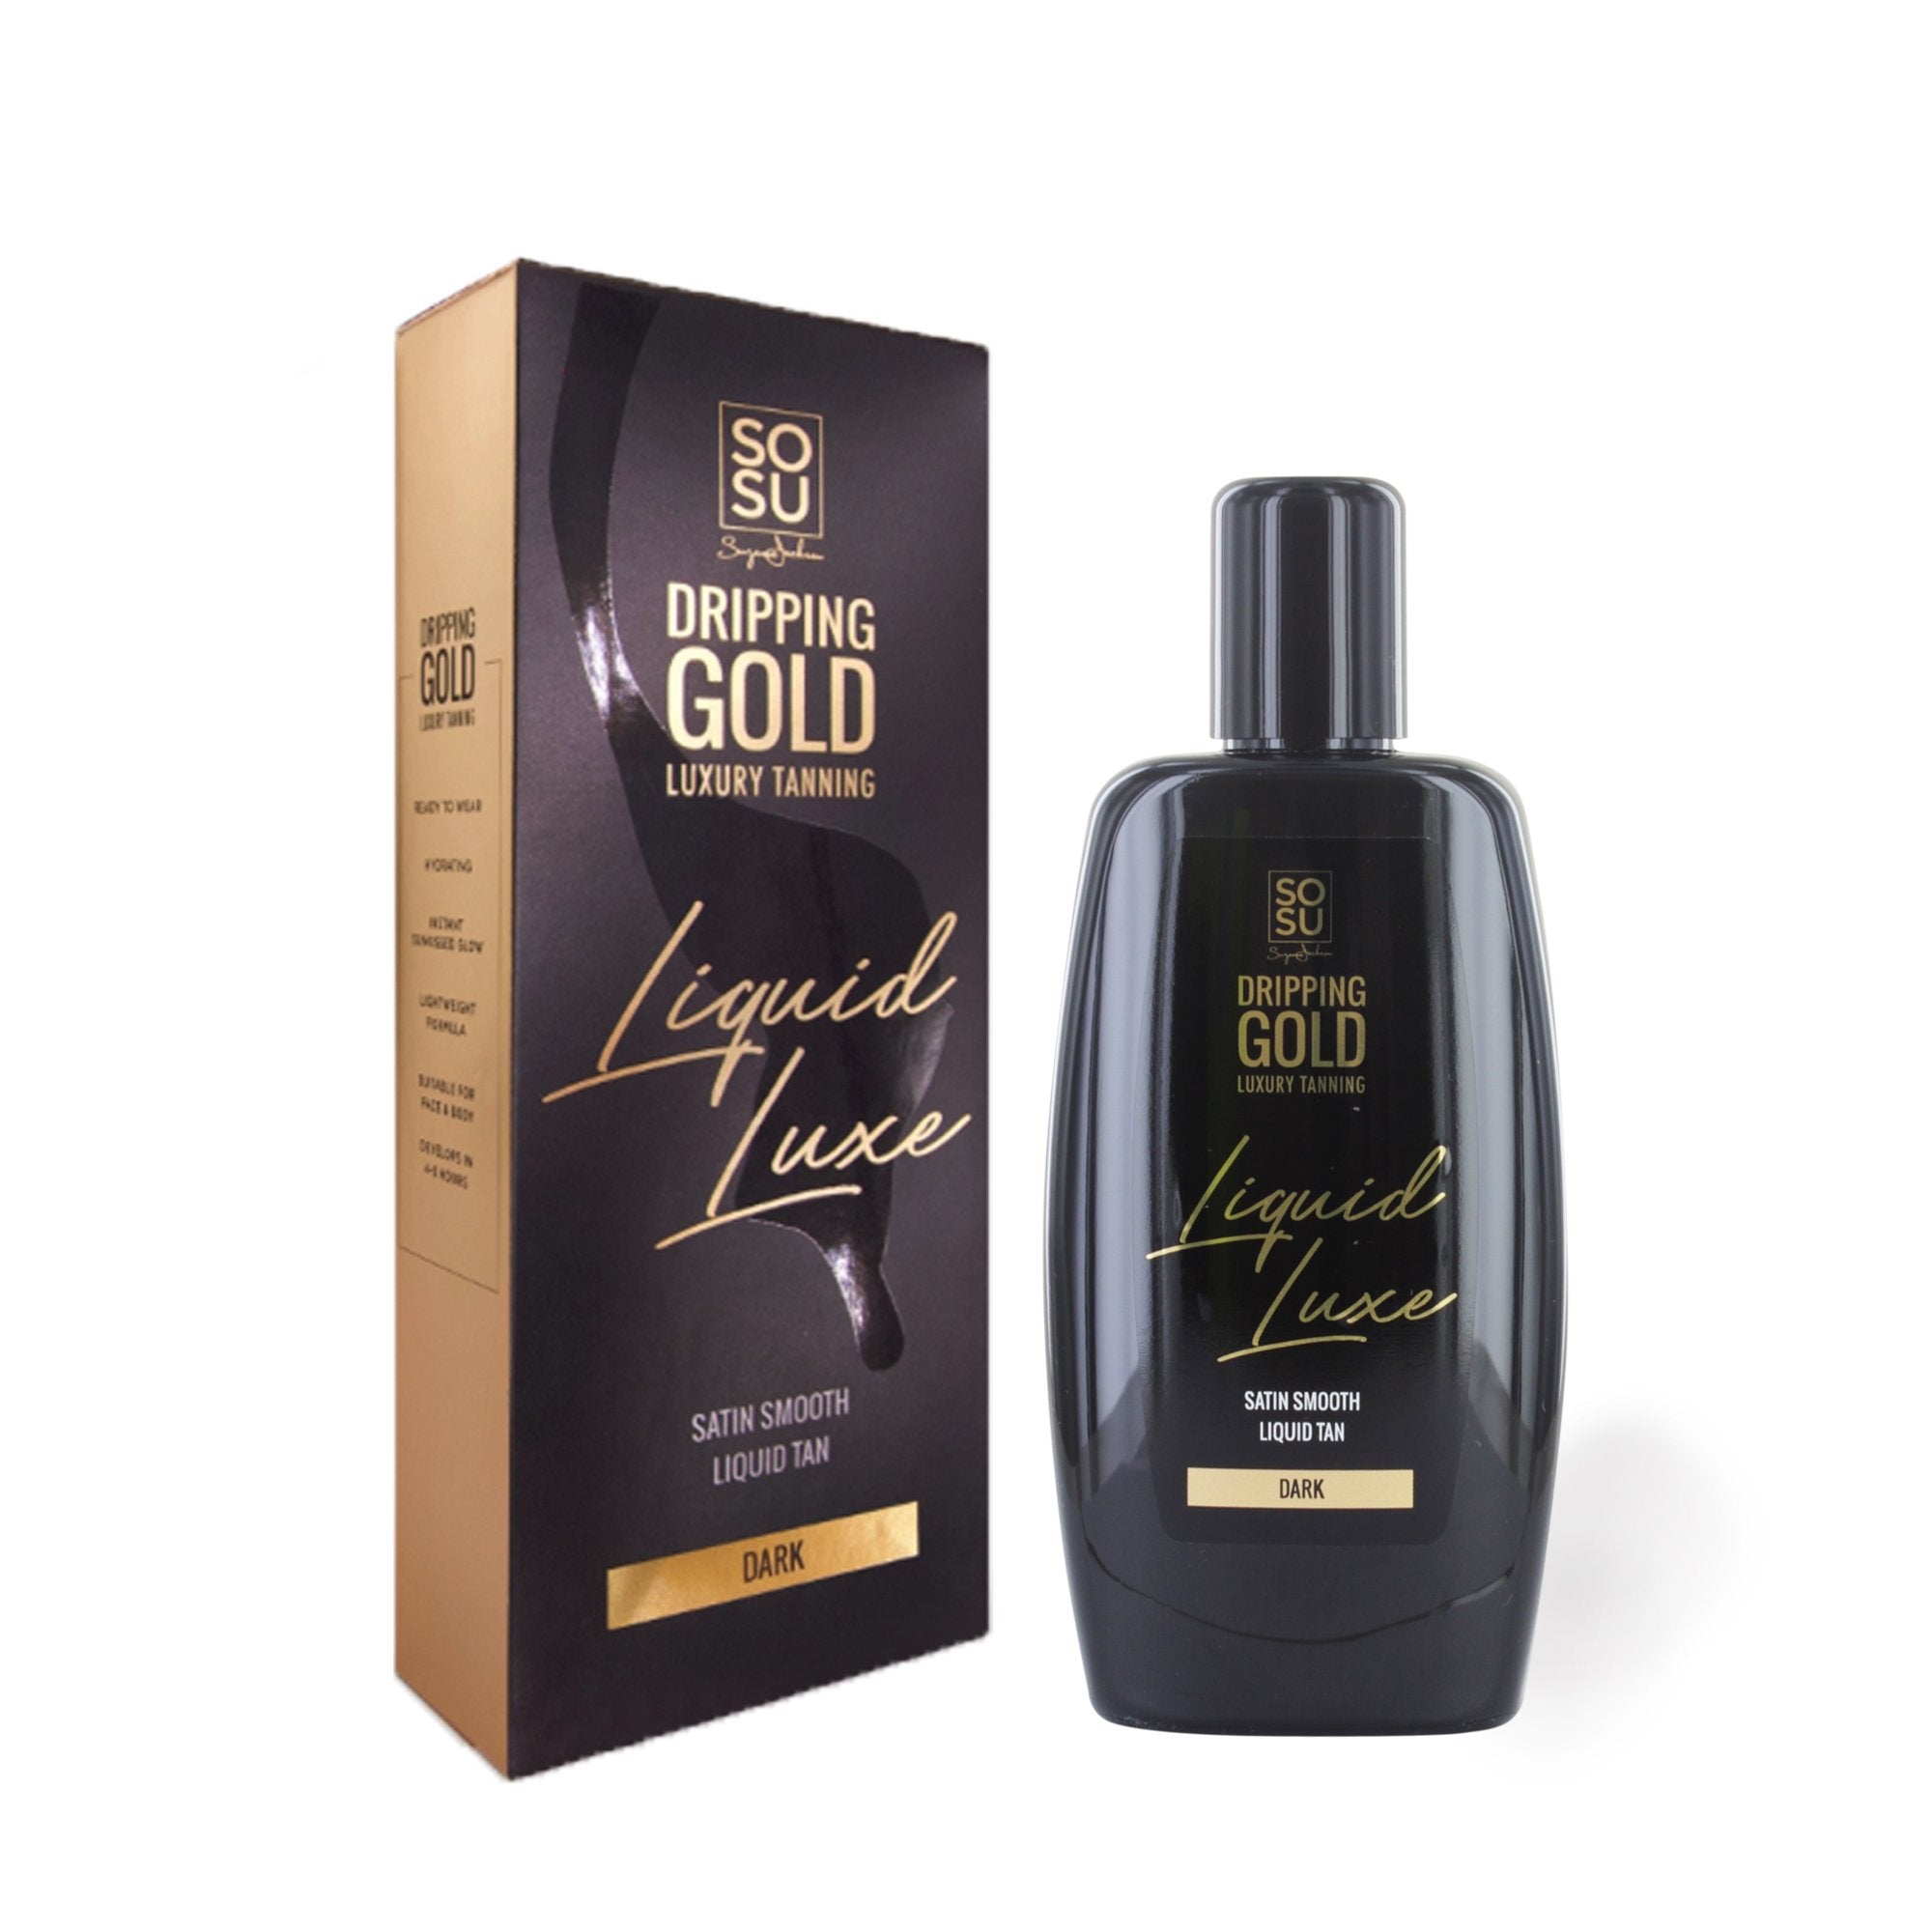 Dripping Gold Liquid Luxe